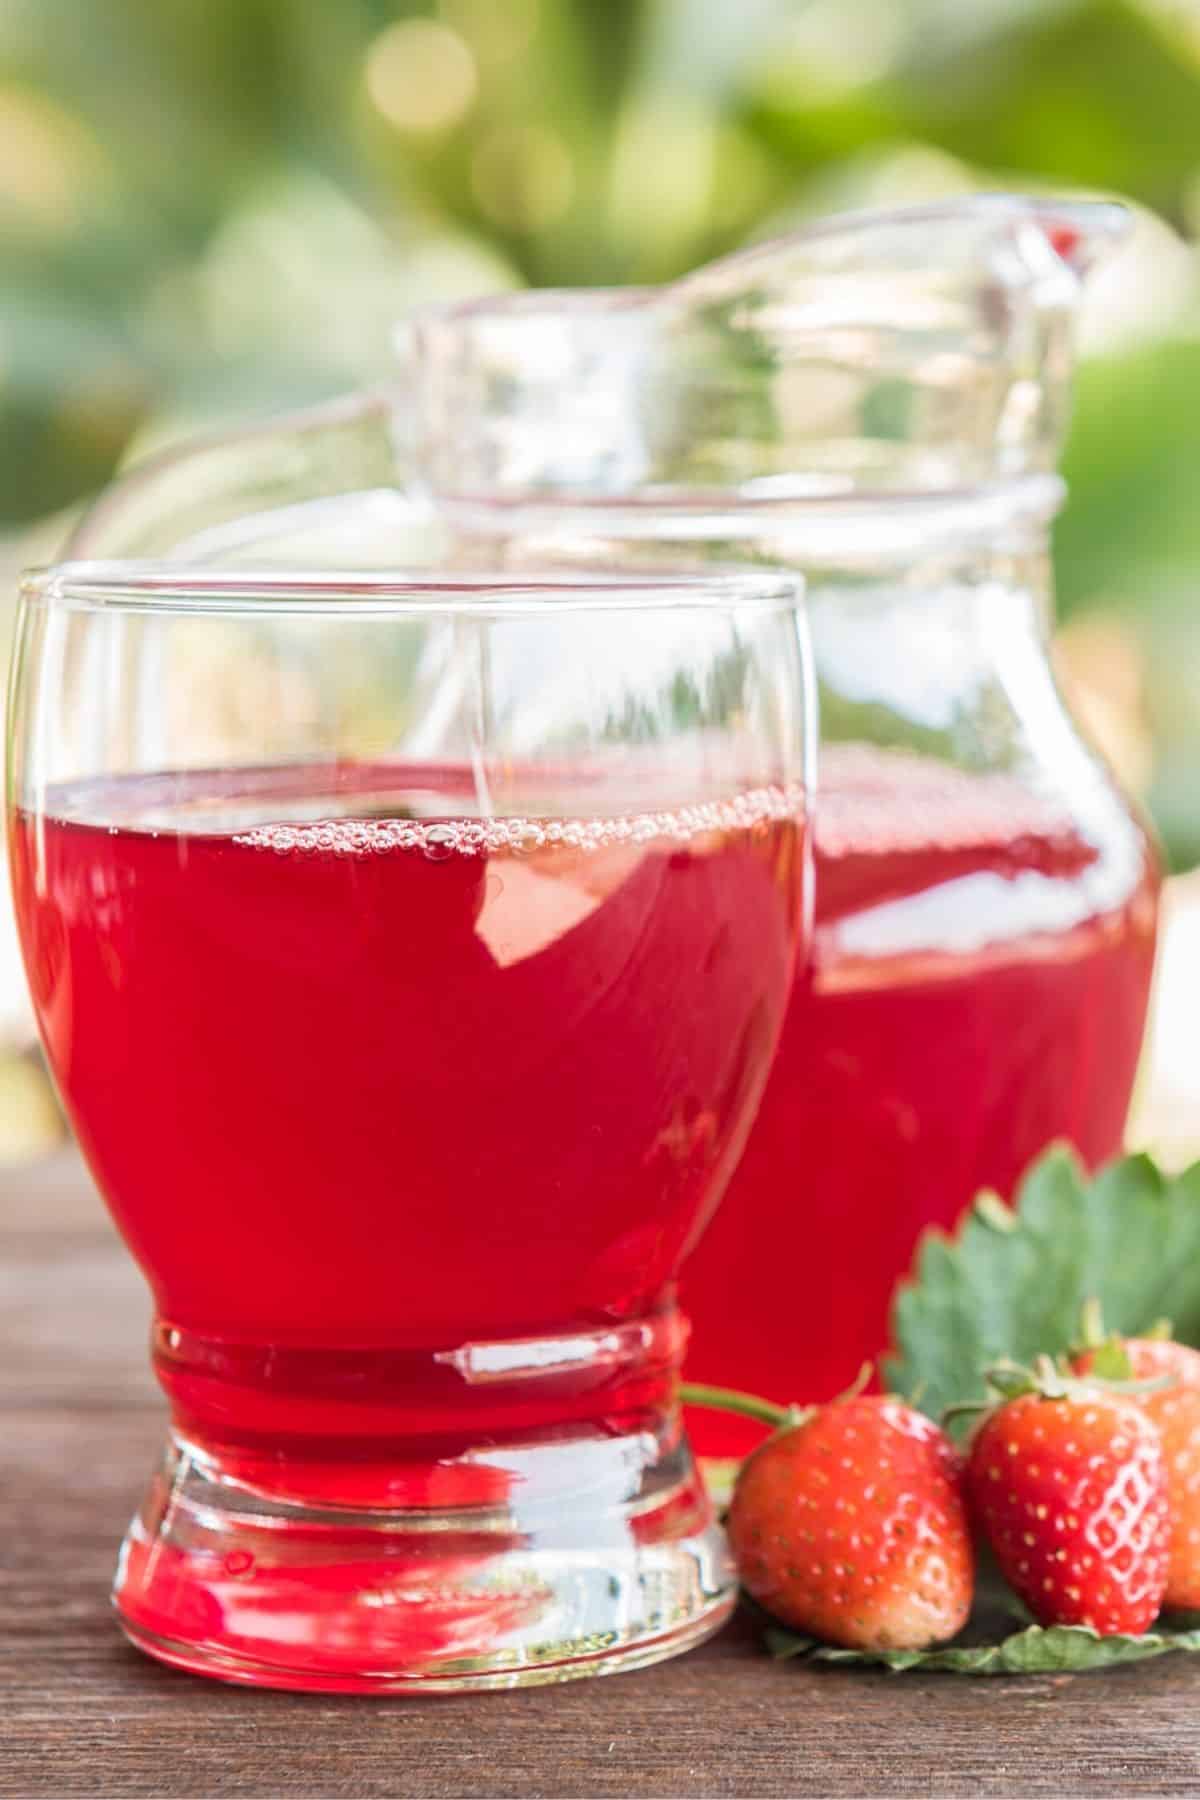 pitcher and glass of strawberry juice on a table outside.